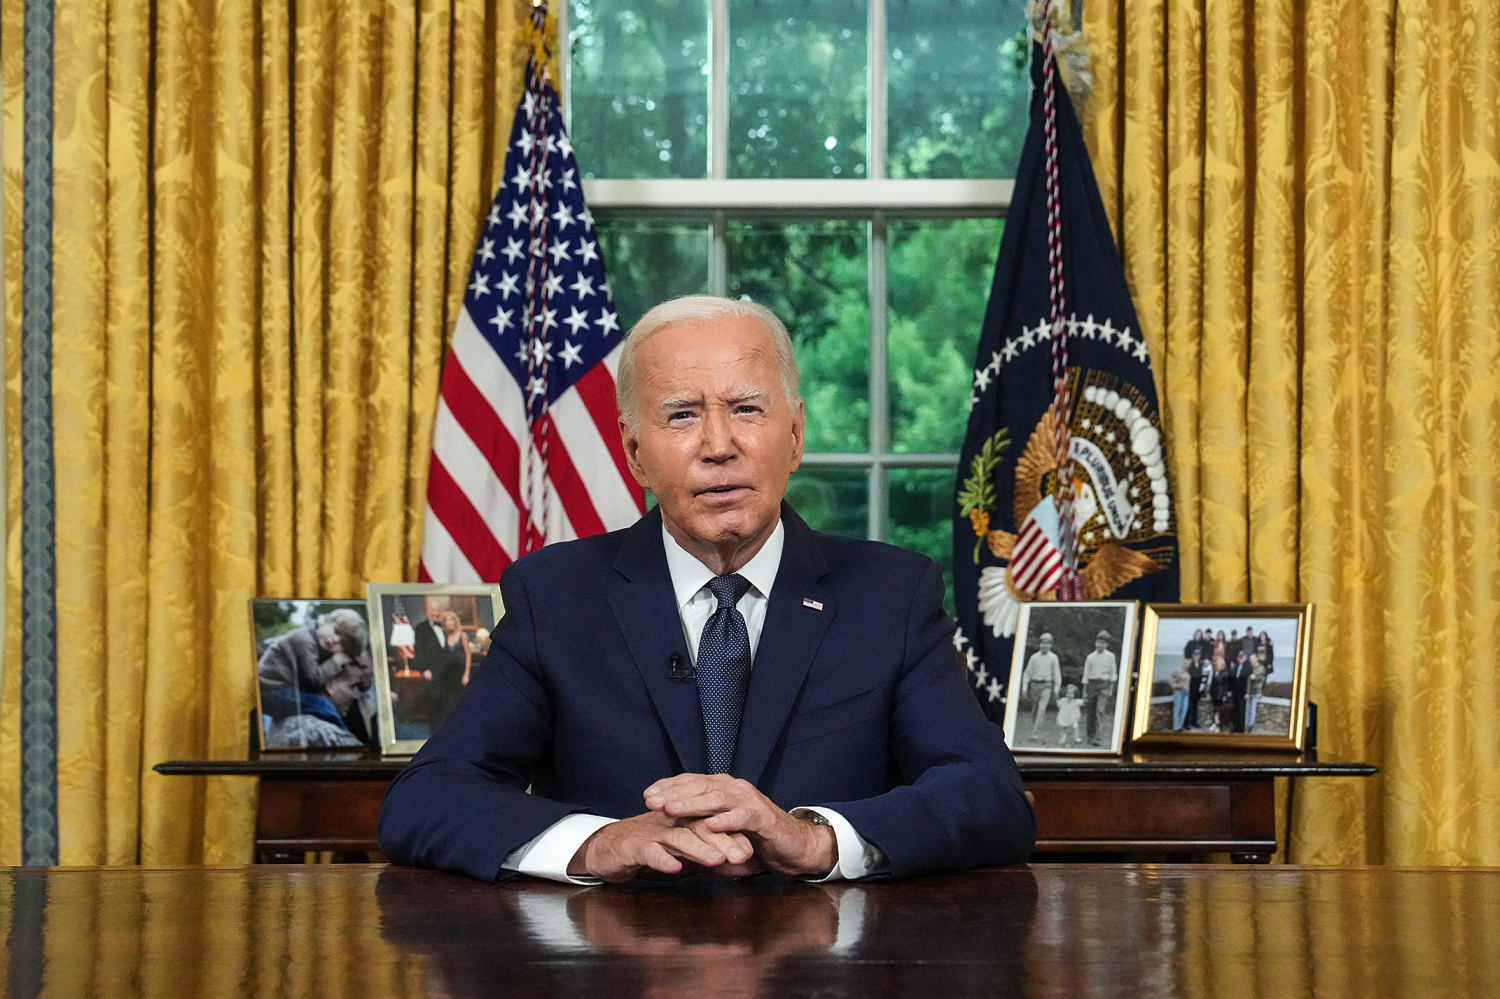 Biden to give a White House address on his decision to exit the race